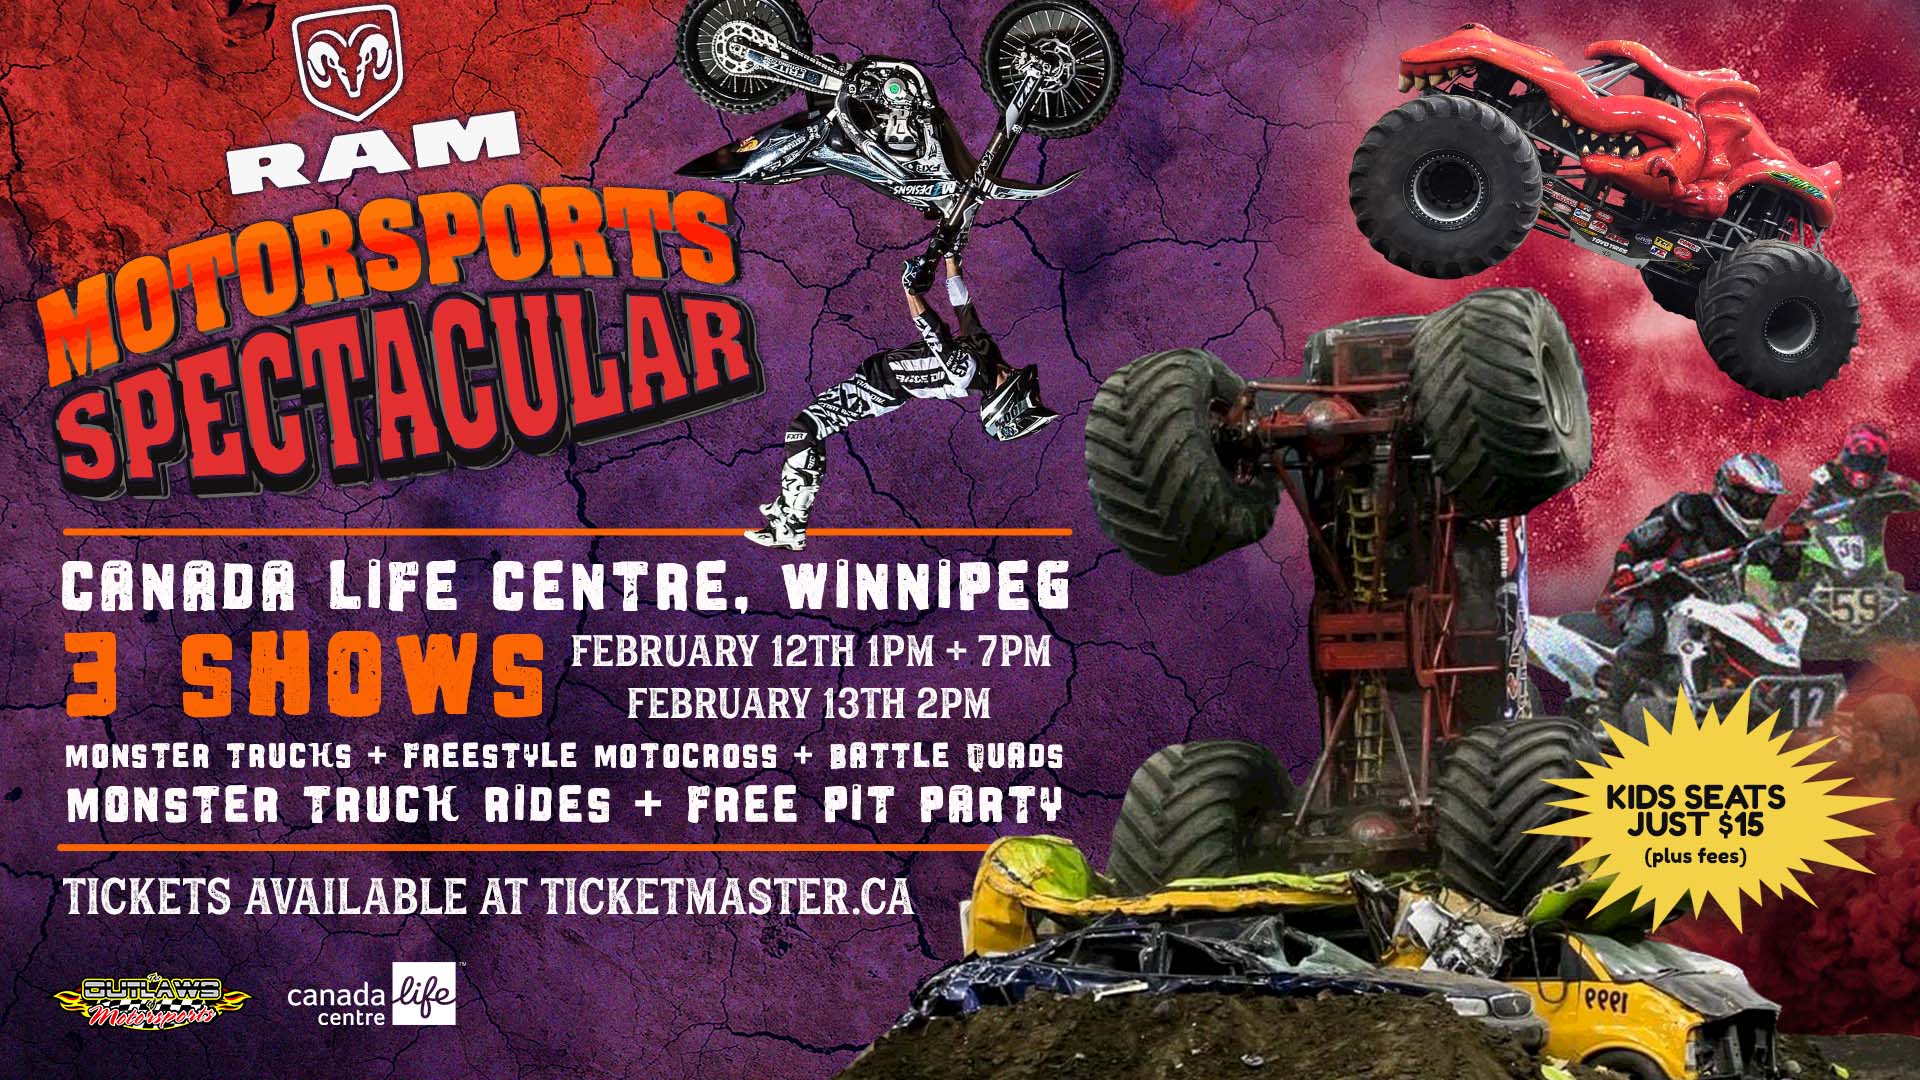 Monster Jam® Returns to Mercedes-Benz Stadium for an Action-Packed Weekend  of Full Throttle Family Fun on February 22-23